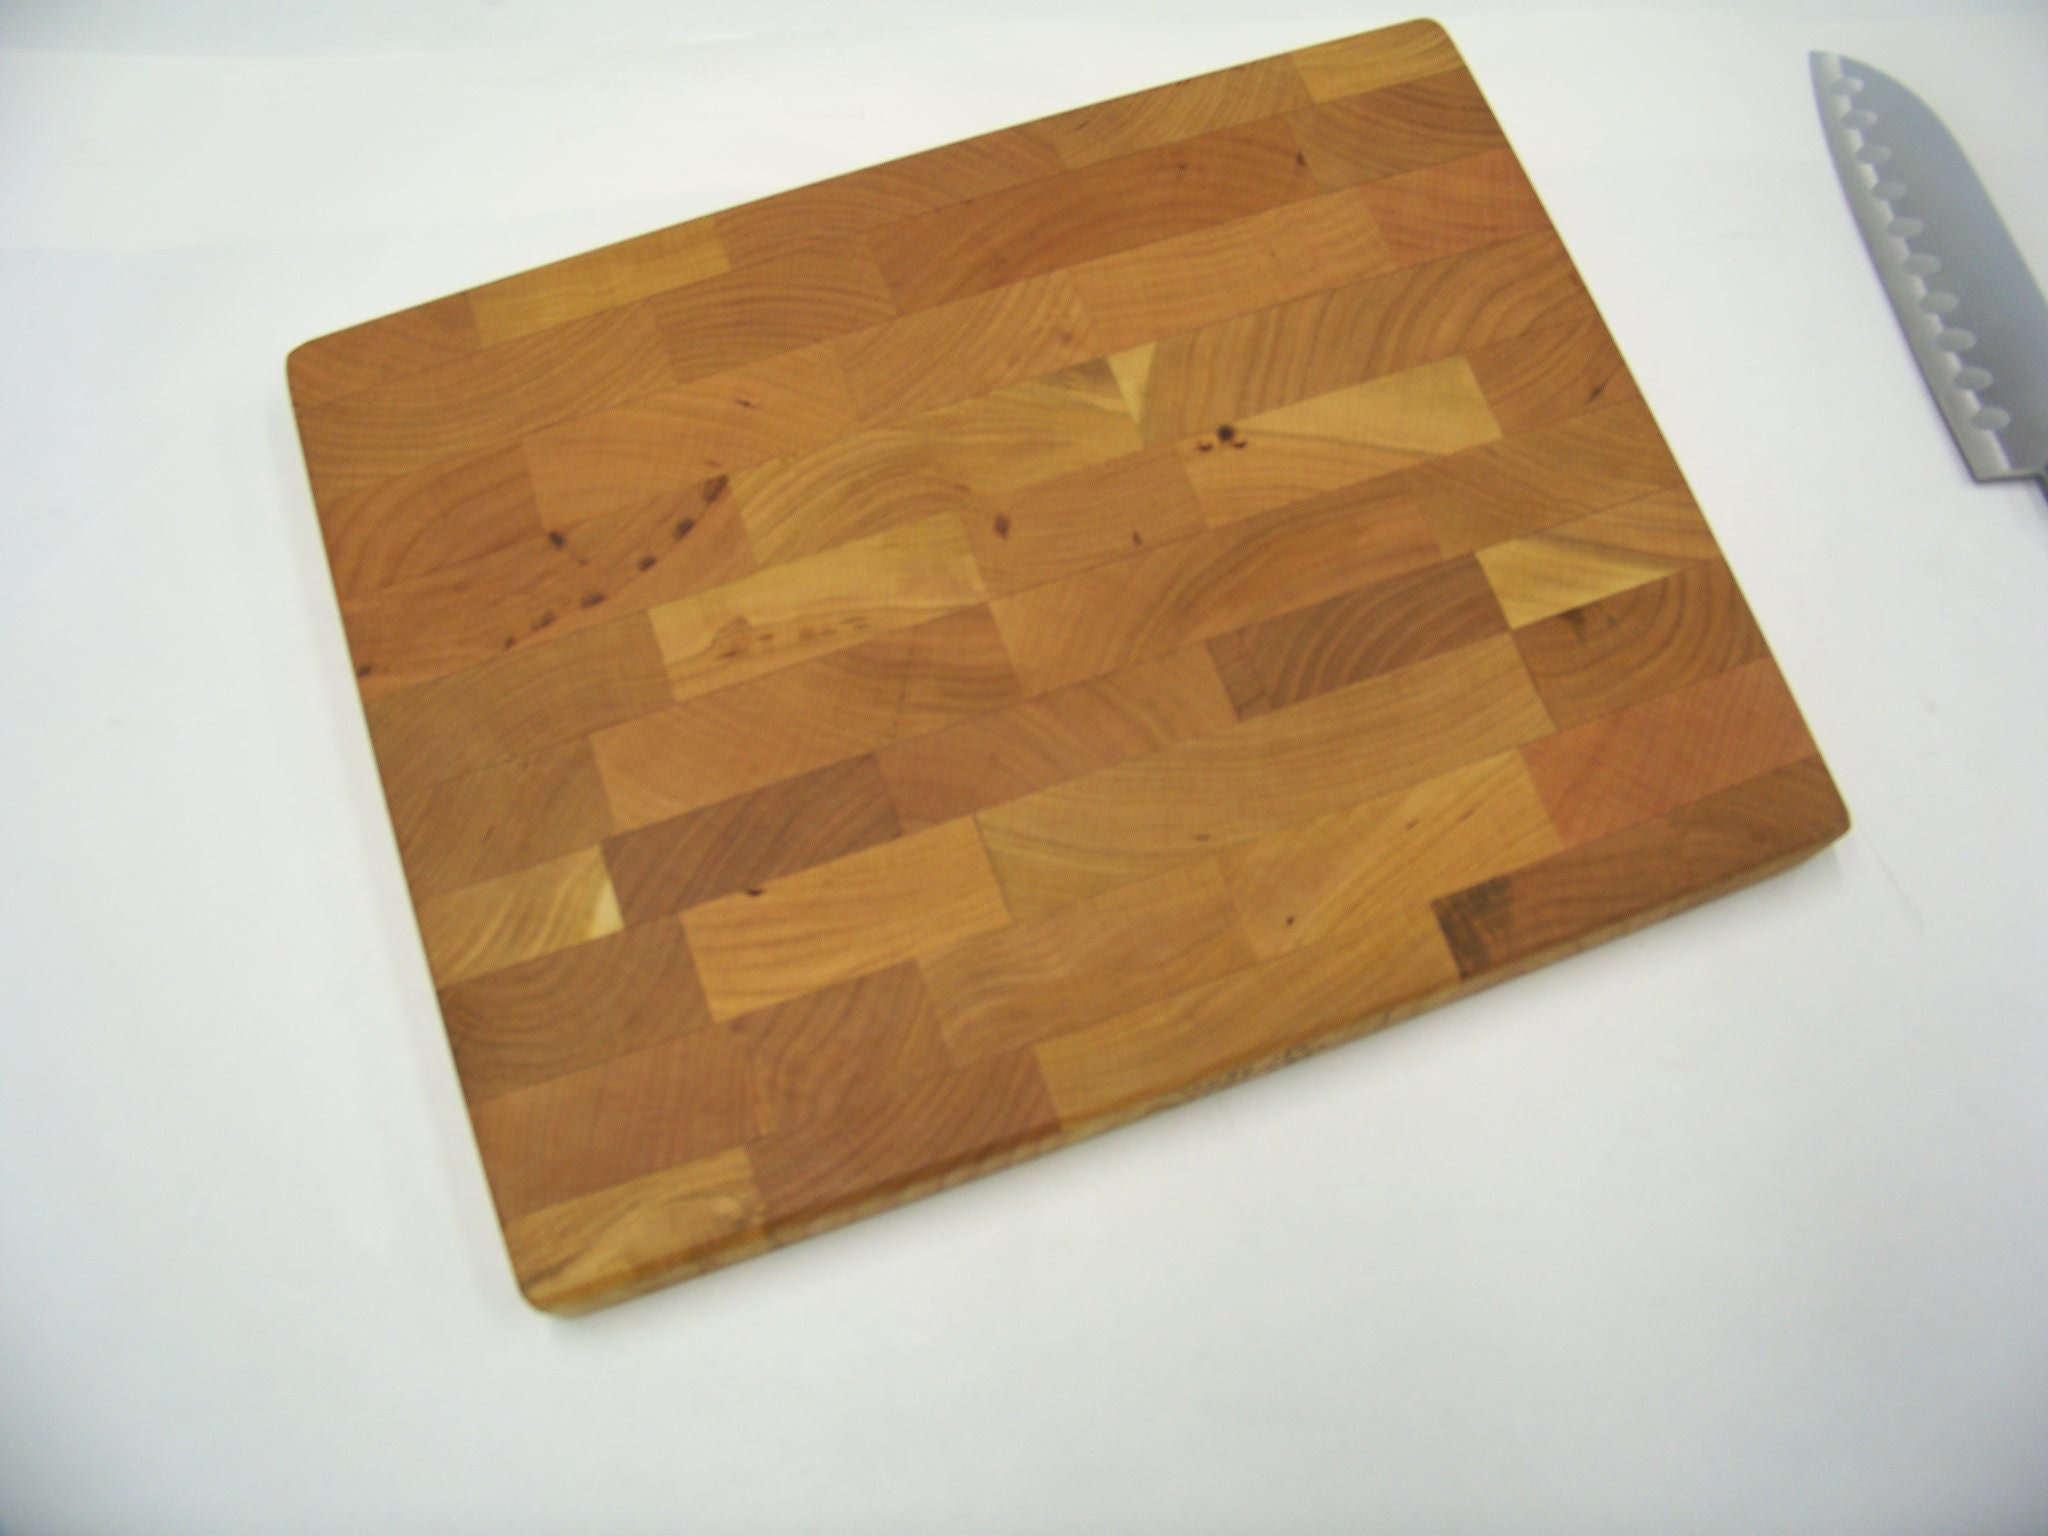 13" Rustic Cherry End Grain Cutting Boards For Sale Great Gift Made in USA. 